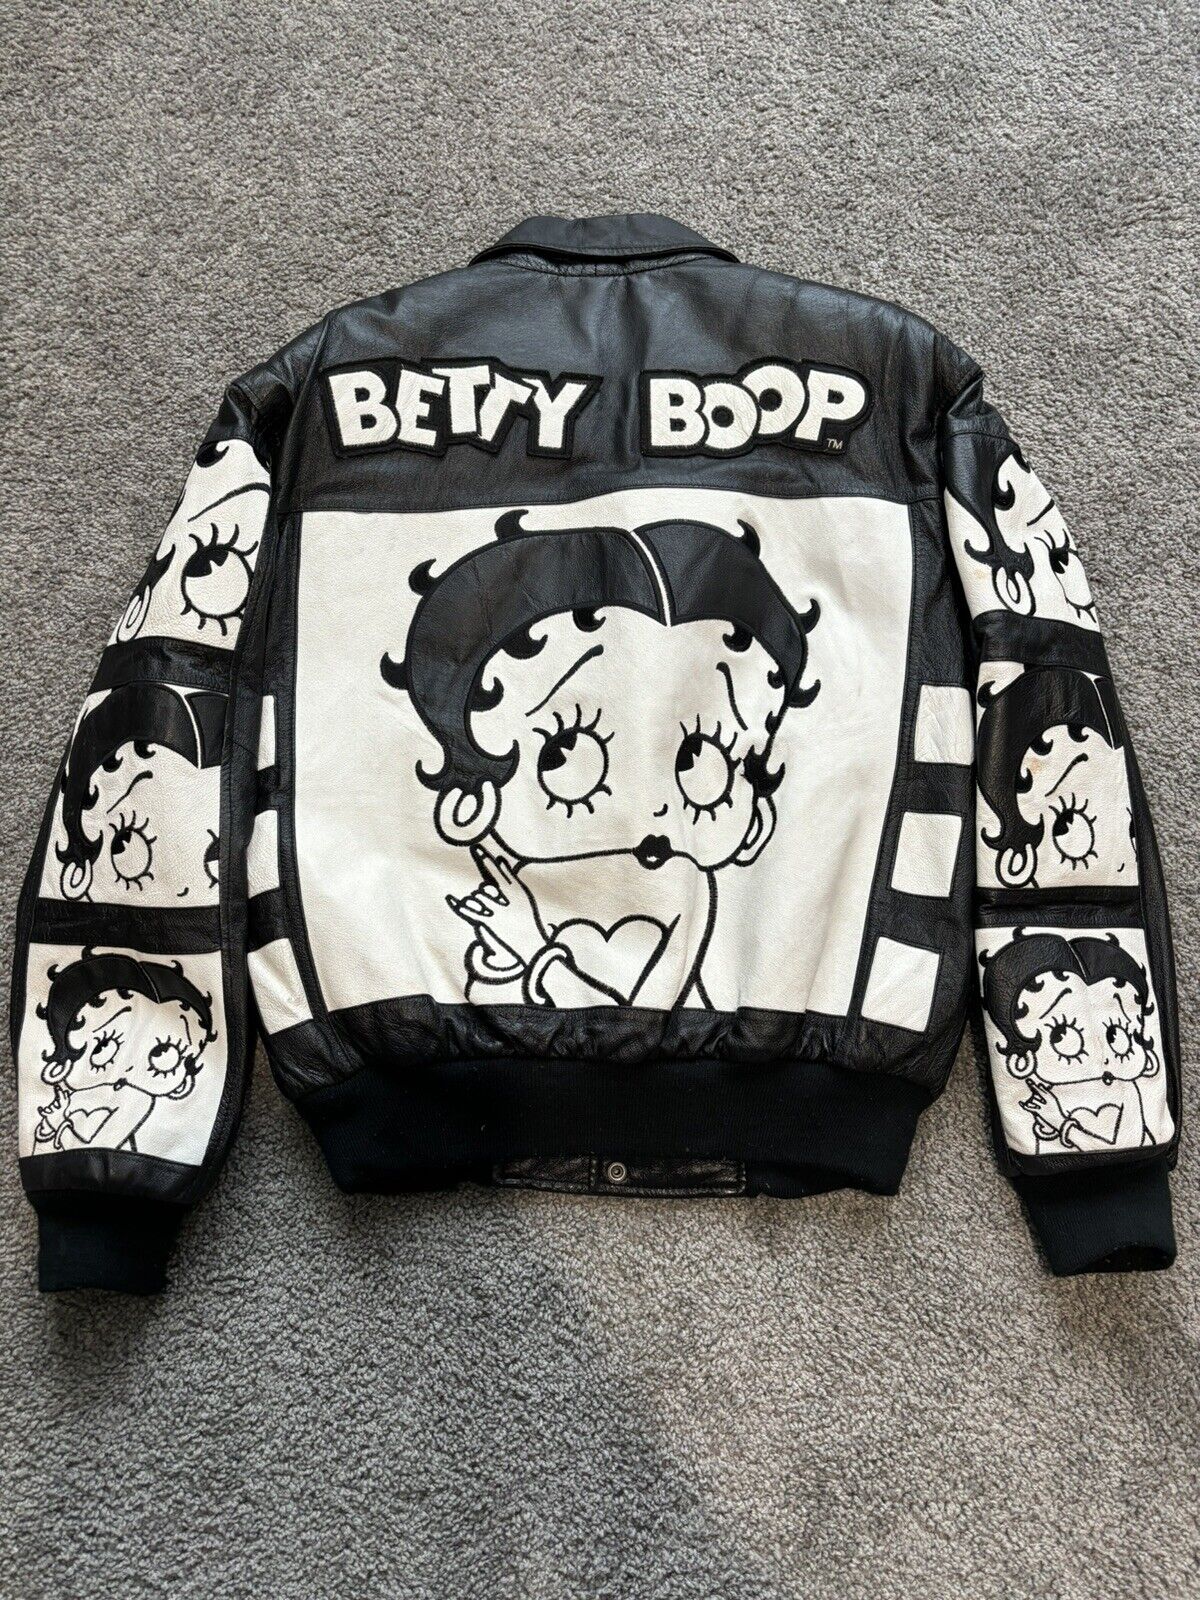 Vintage 1996 AMERICAN TOONS Betty Boop Black White Adult Leather Jacket sz Small